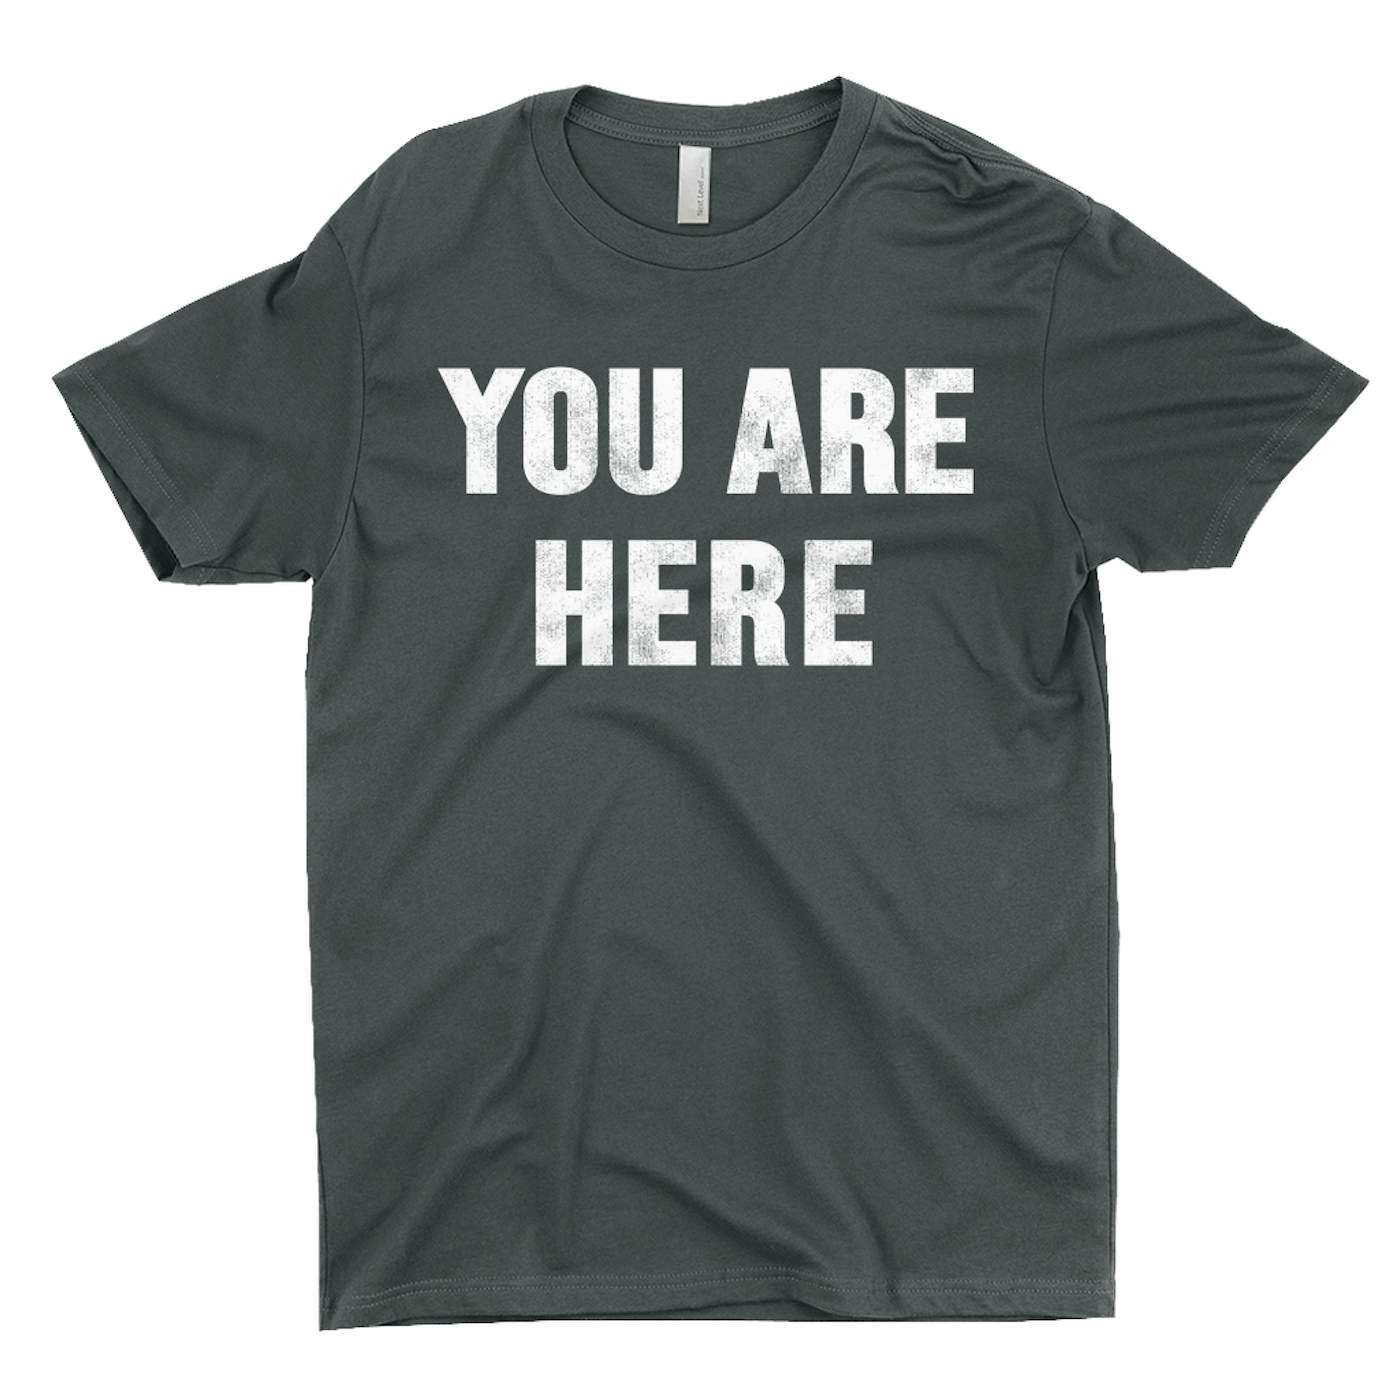 John Lennon T-Shirt | You Are Here Distressed Design Worn By John Lennon John Lennon Shirt